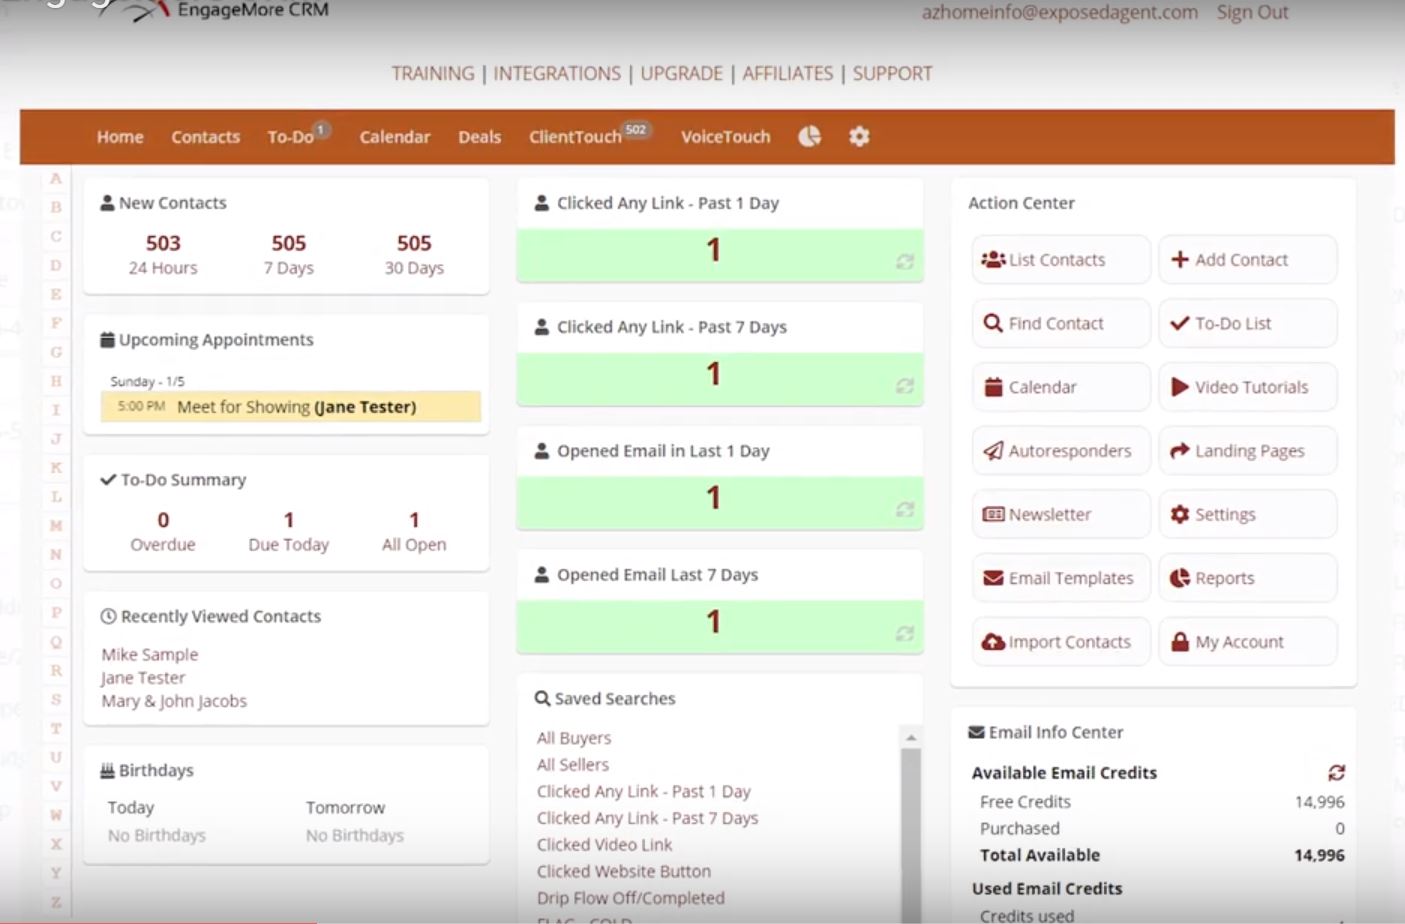 EngageMore CRM dashboard